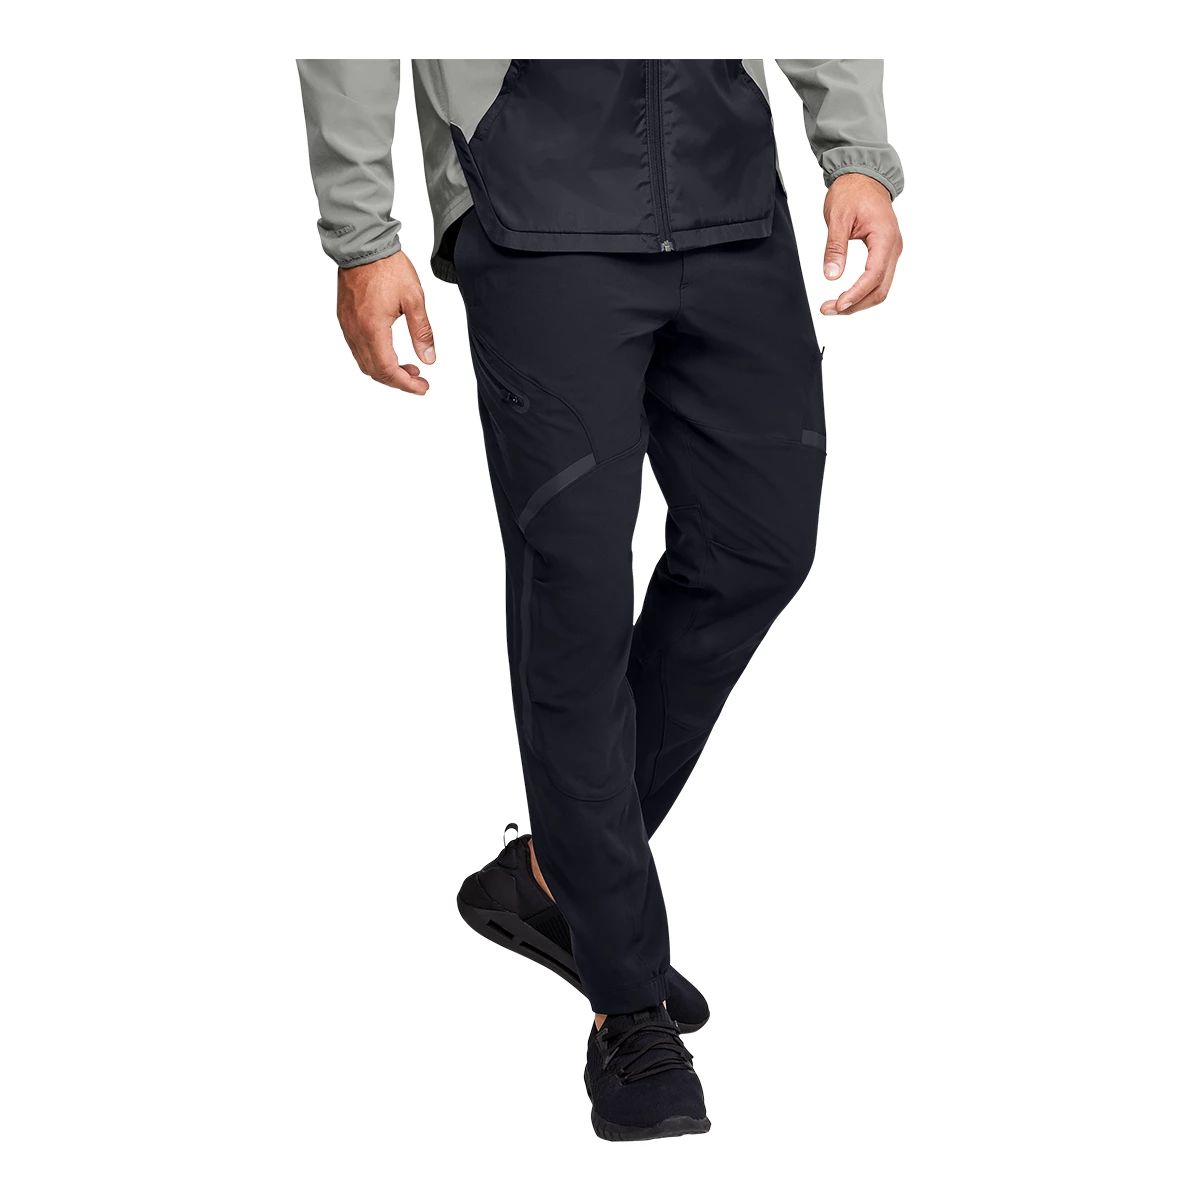 Under Armour Men's Stretch Woven Utility Cargo Pants, Water